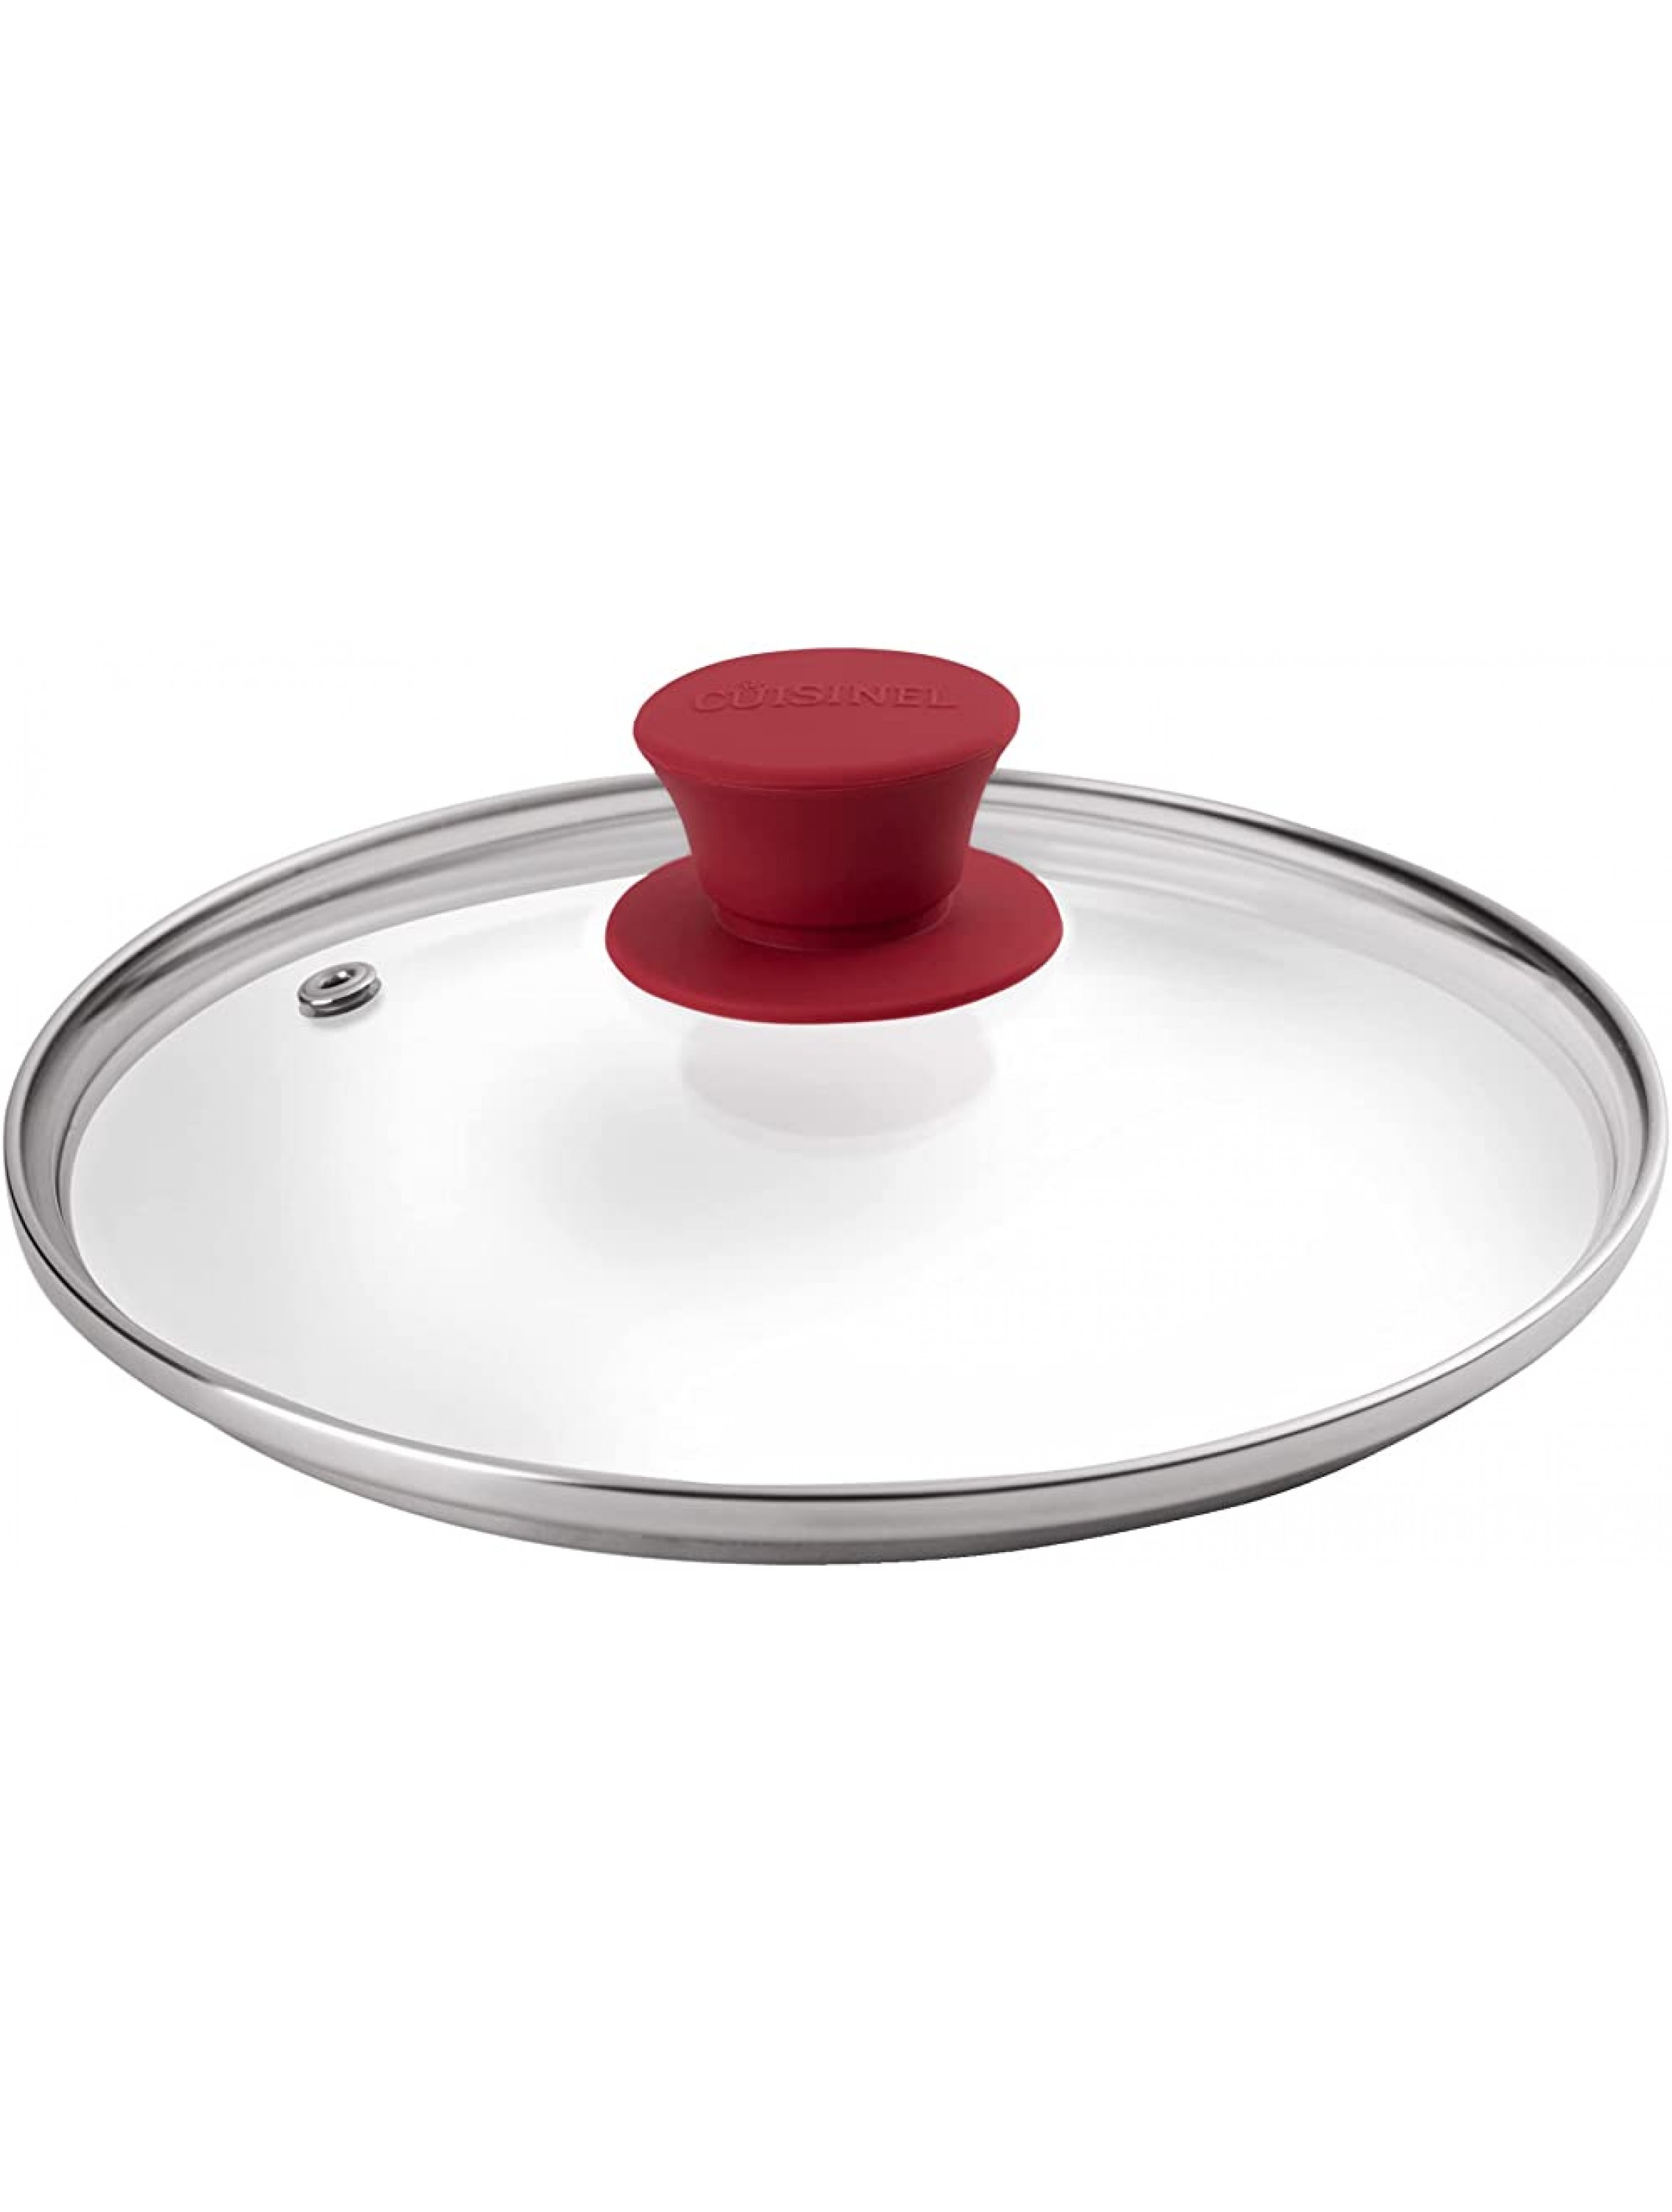 Glass Lid with Steam Vent Hole 8-Inch 20.32cm Compatible with Lodge Cast Iron Skillet Pan Fully Assembled Universal Replacement Cover Tempered and Oven Safe Reinforced Stainless Steel Rim - BDCVYP2JH